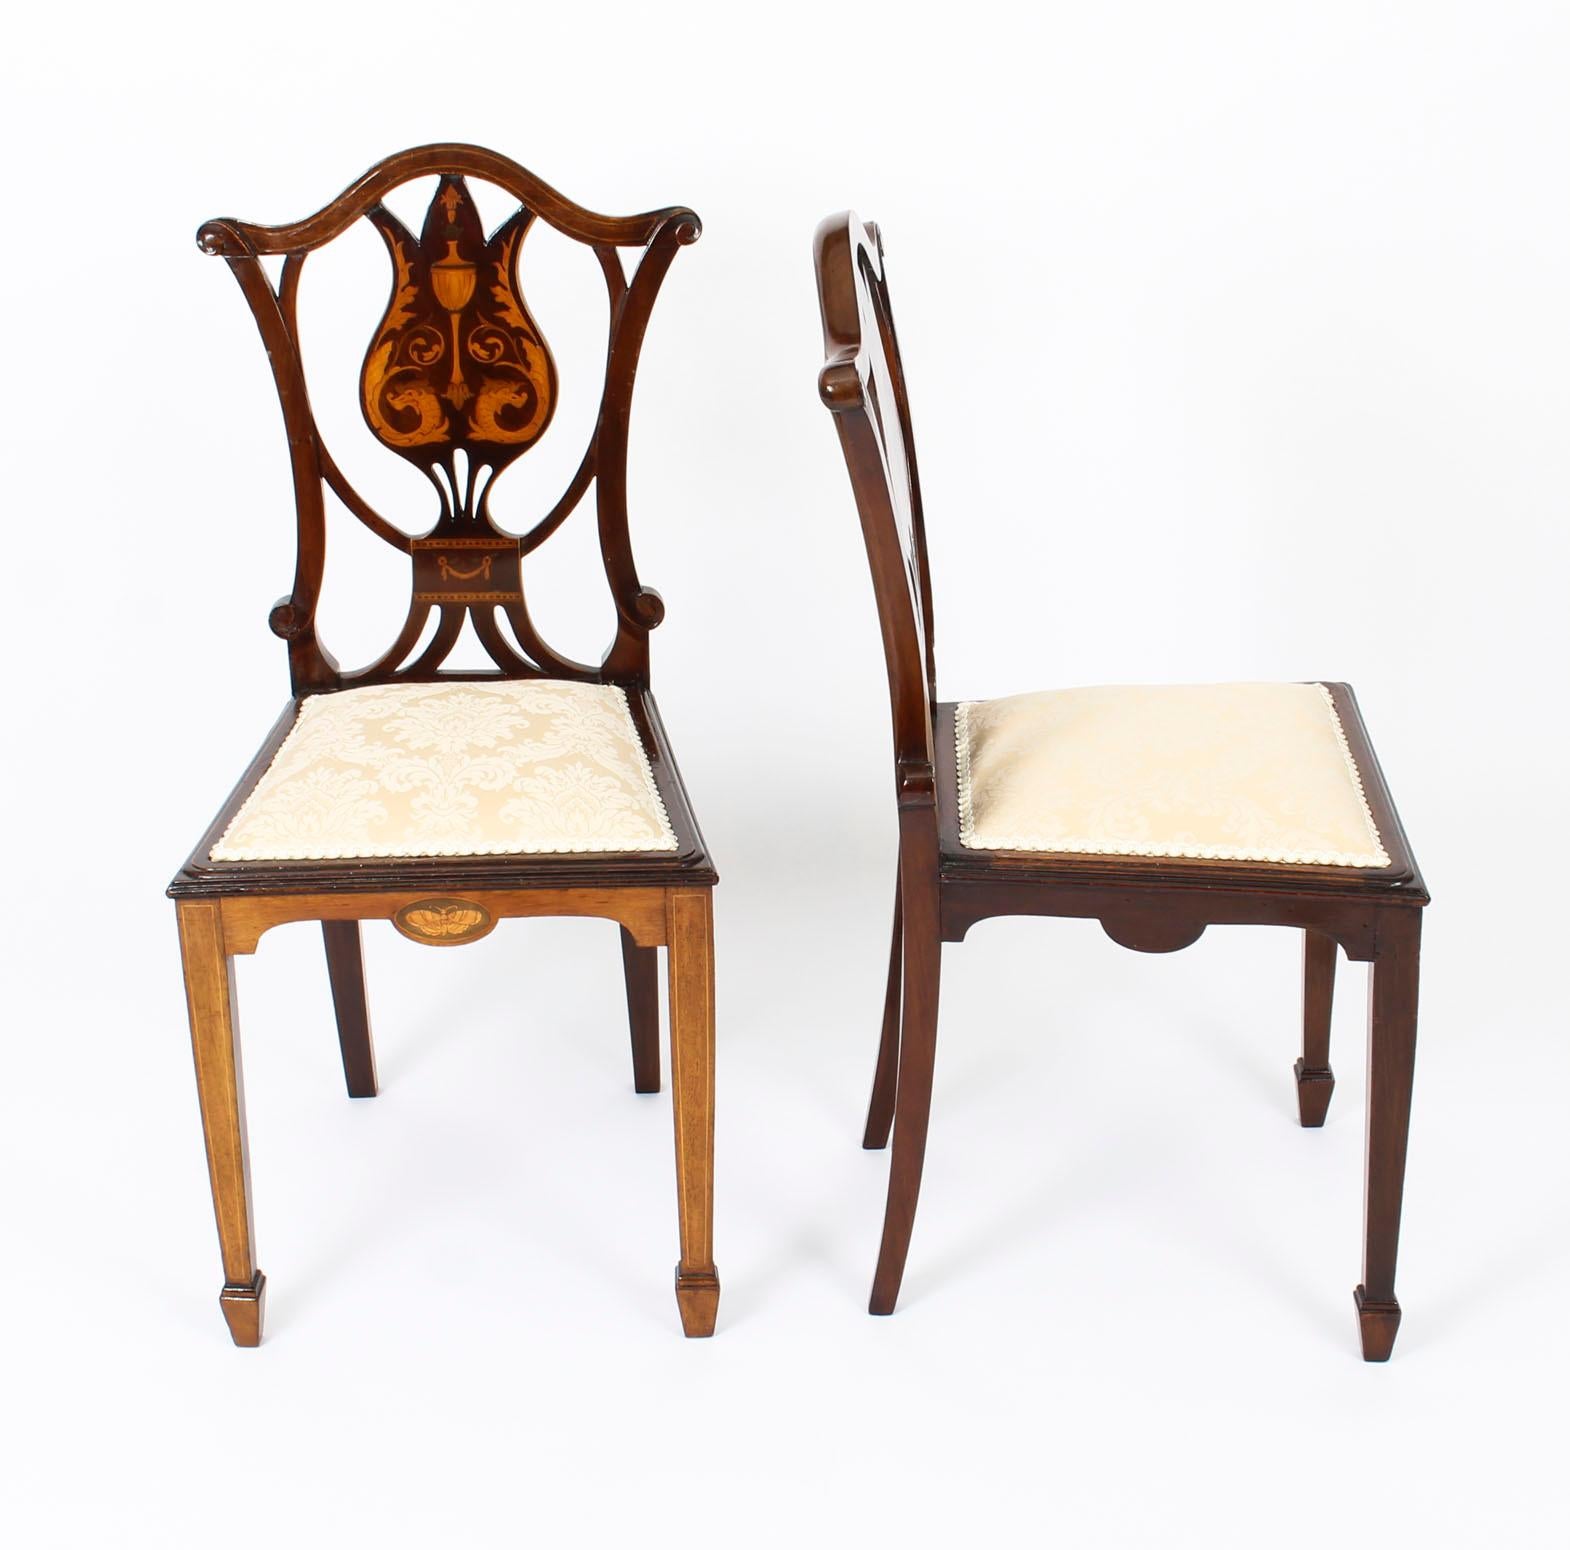 This is a beautiful antique pair of Edwardian mahogany inlaid bedroom chairs, circa 1900 in date.
 
These chairs have been masterfully crafted in beautiful solid mahogany. The cartouche shaped backs are decorated with satinwood marquetry dragons